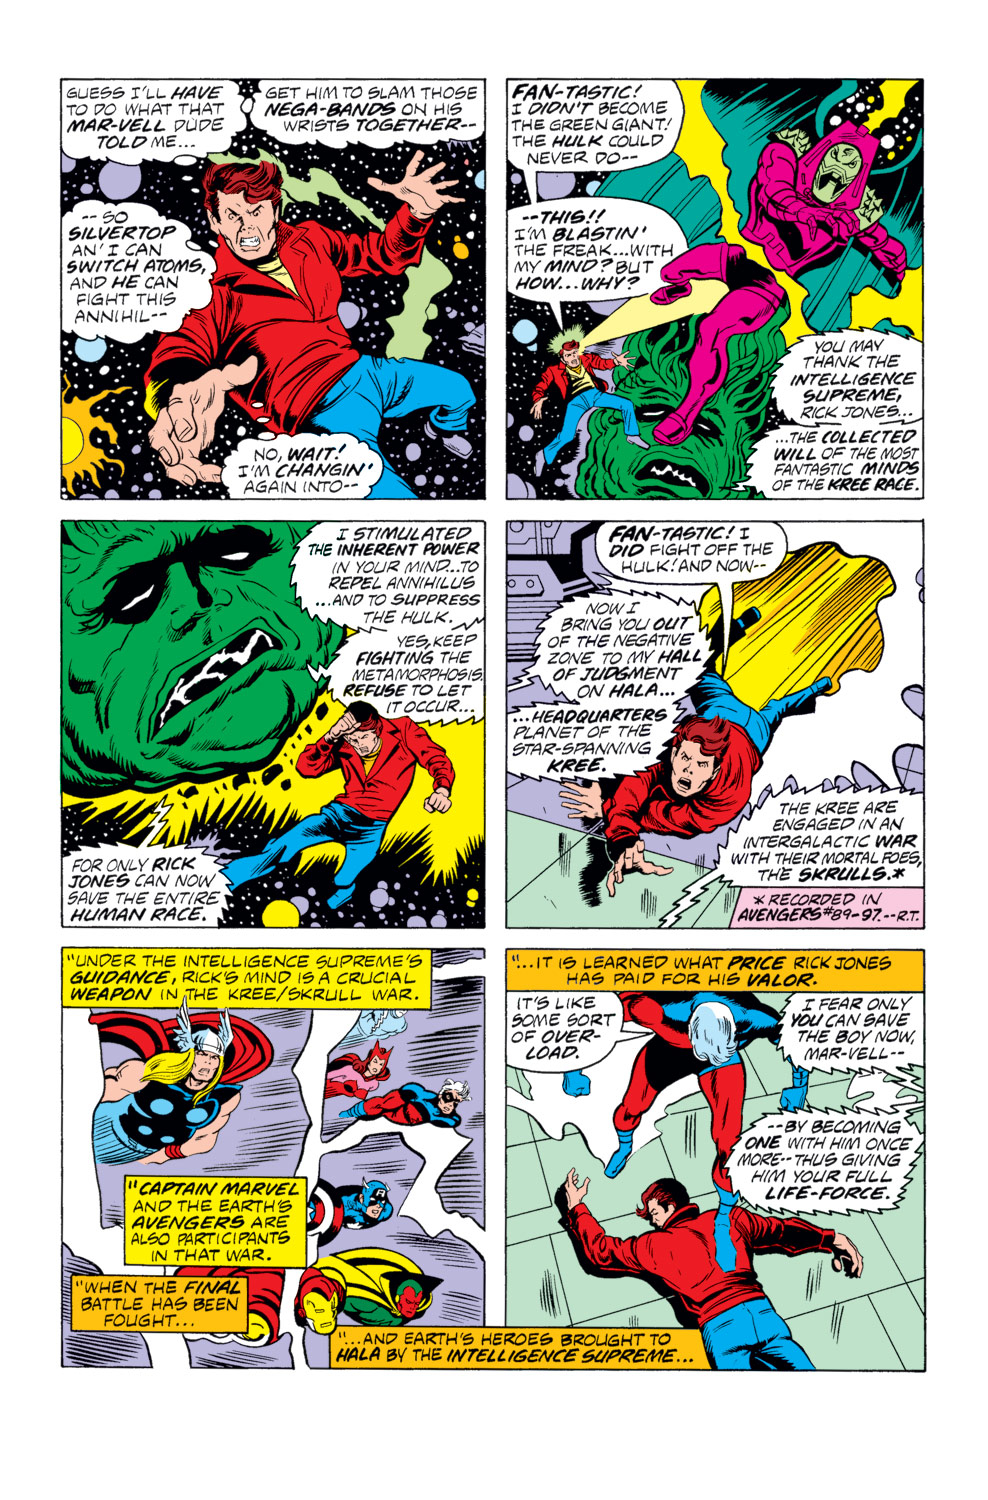 What If? (1977) issue 12 - Rick Jones had become the Hulk - Page 18